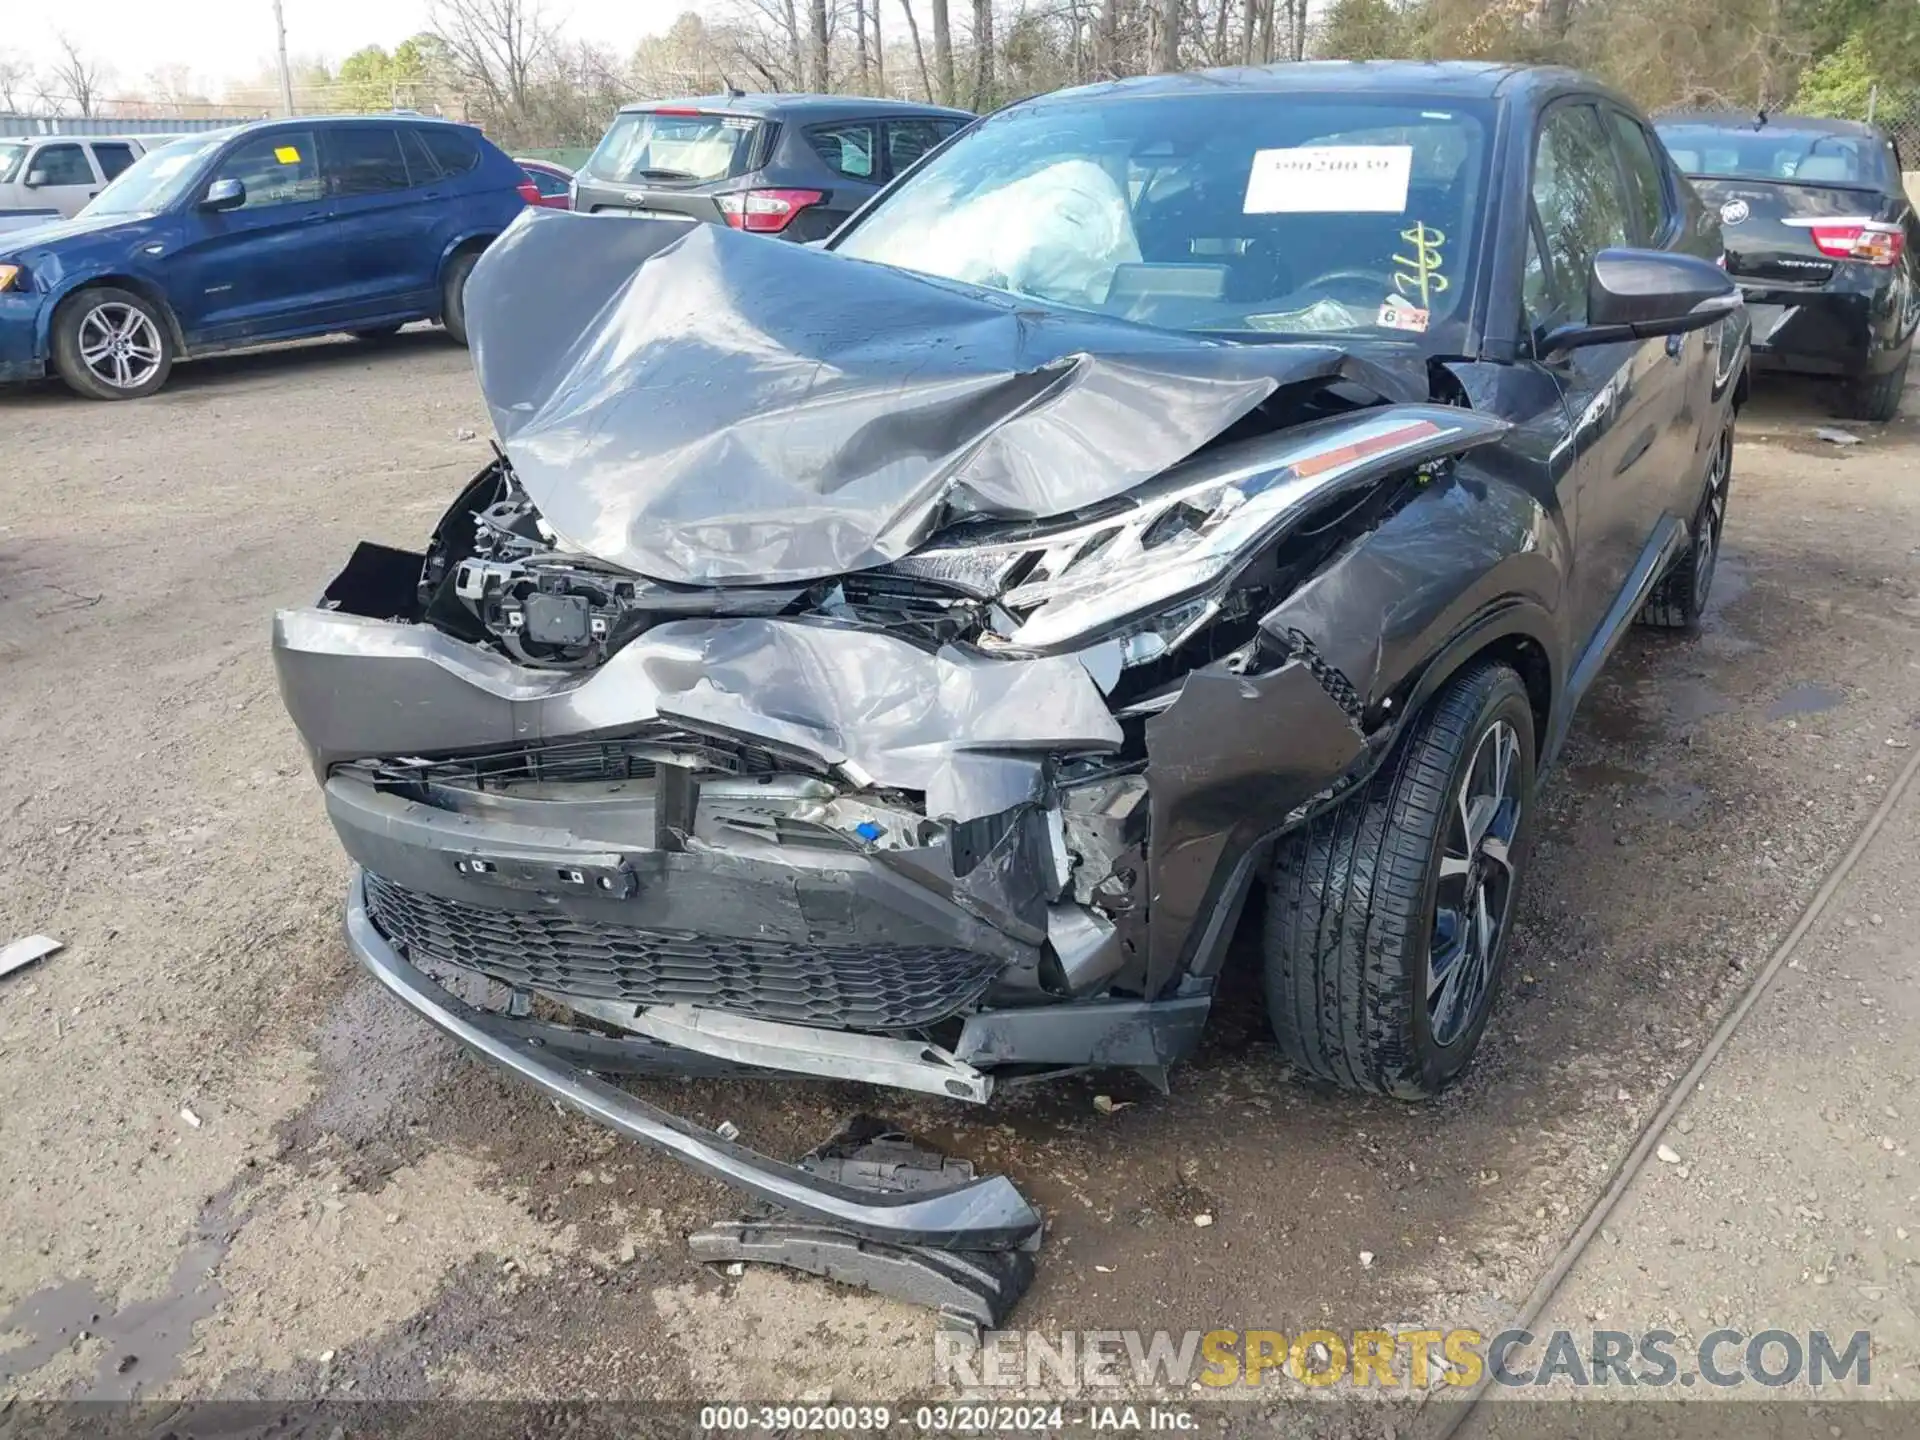 6 Photograph of a damaged car NMTKHMBXXNR145634 TOYOTA C-HR 2022